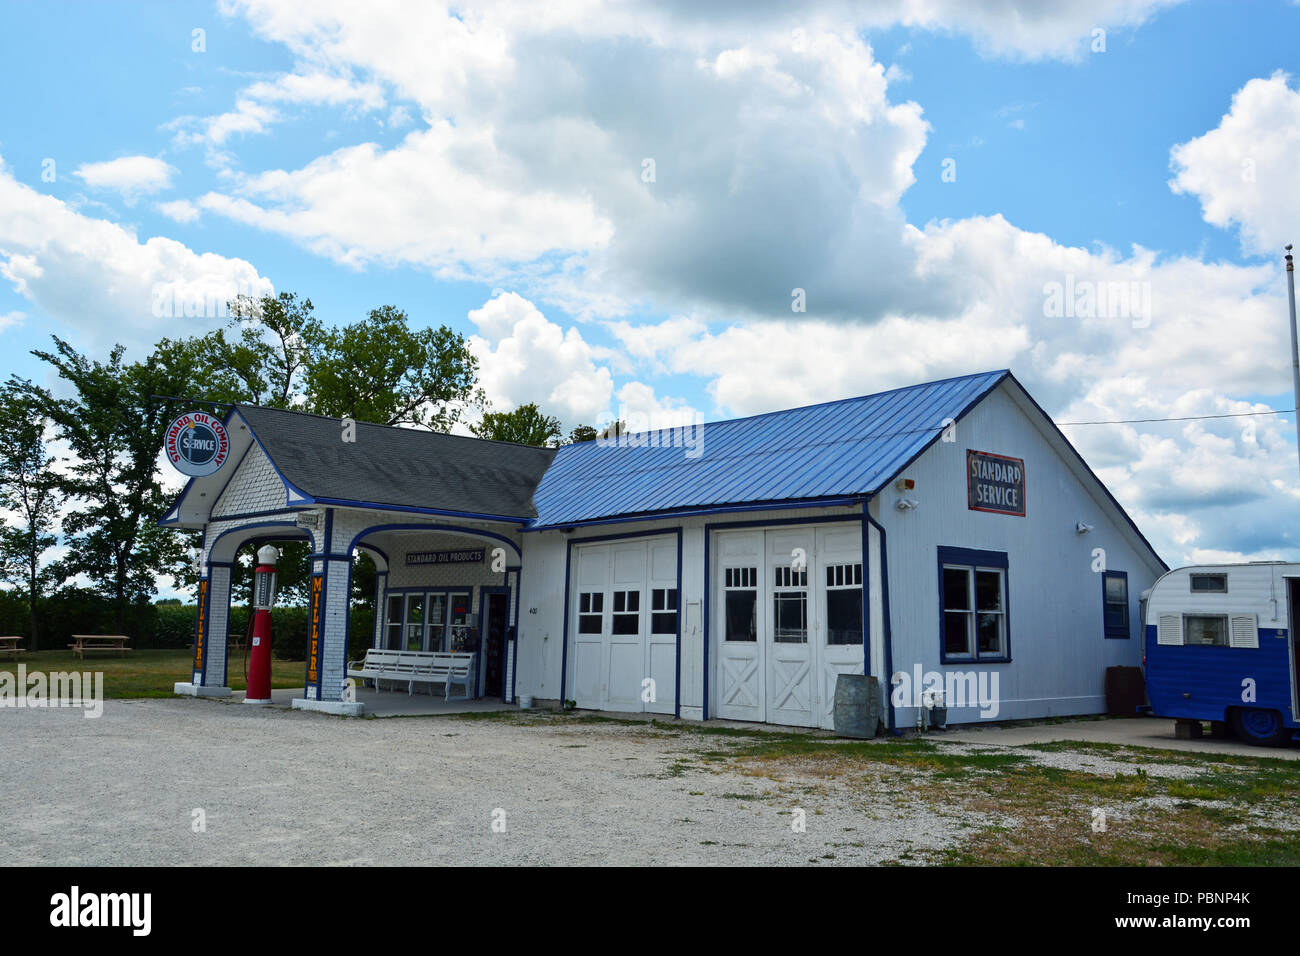 The restored 1932 Standard Oil Service Station on the old Rte 66 in Odell Illinois is listed on the National Register of Historic Places. Stock Photo